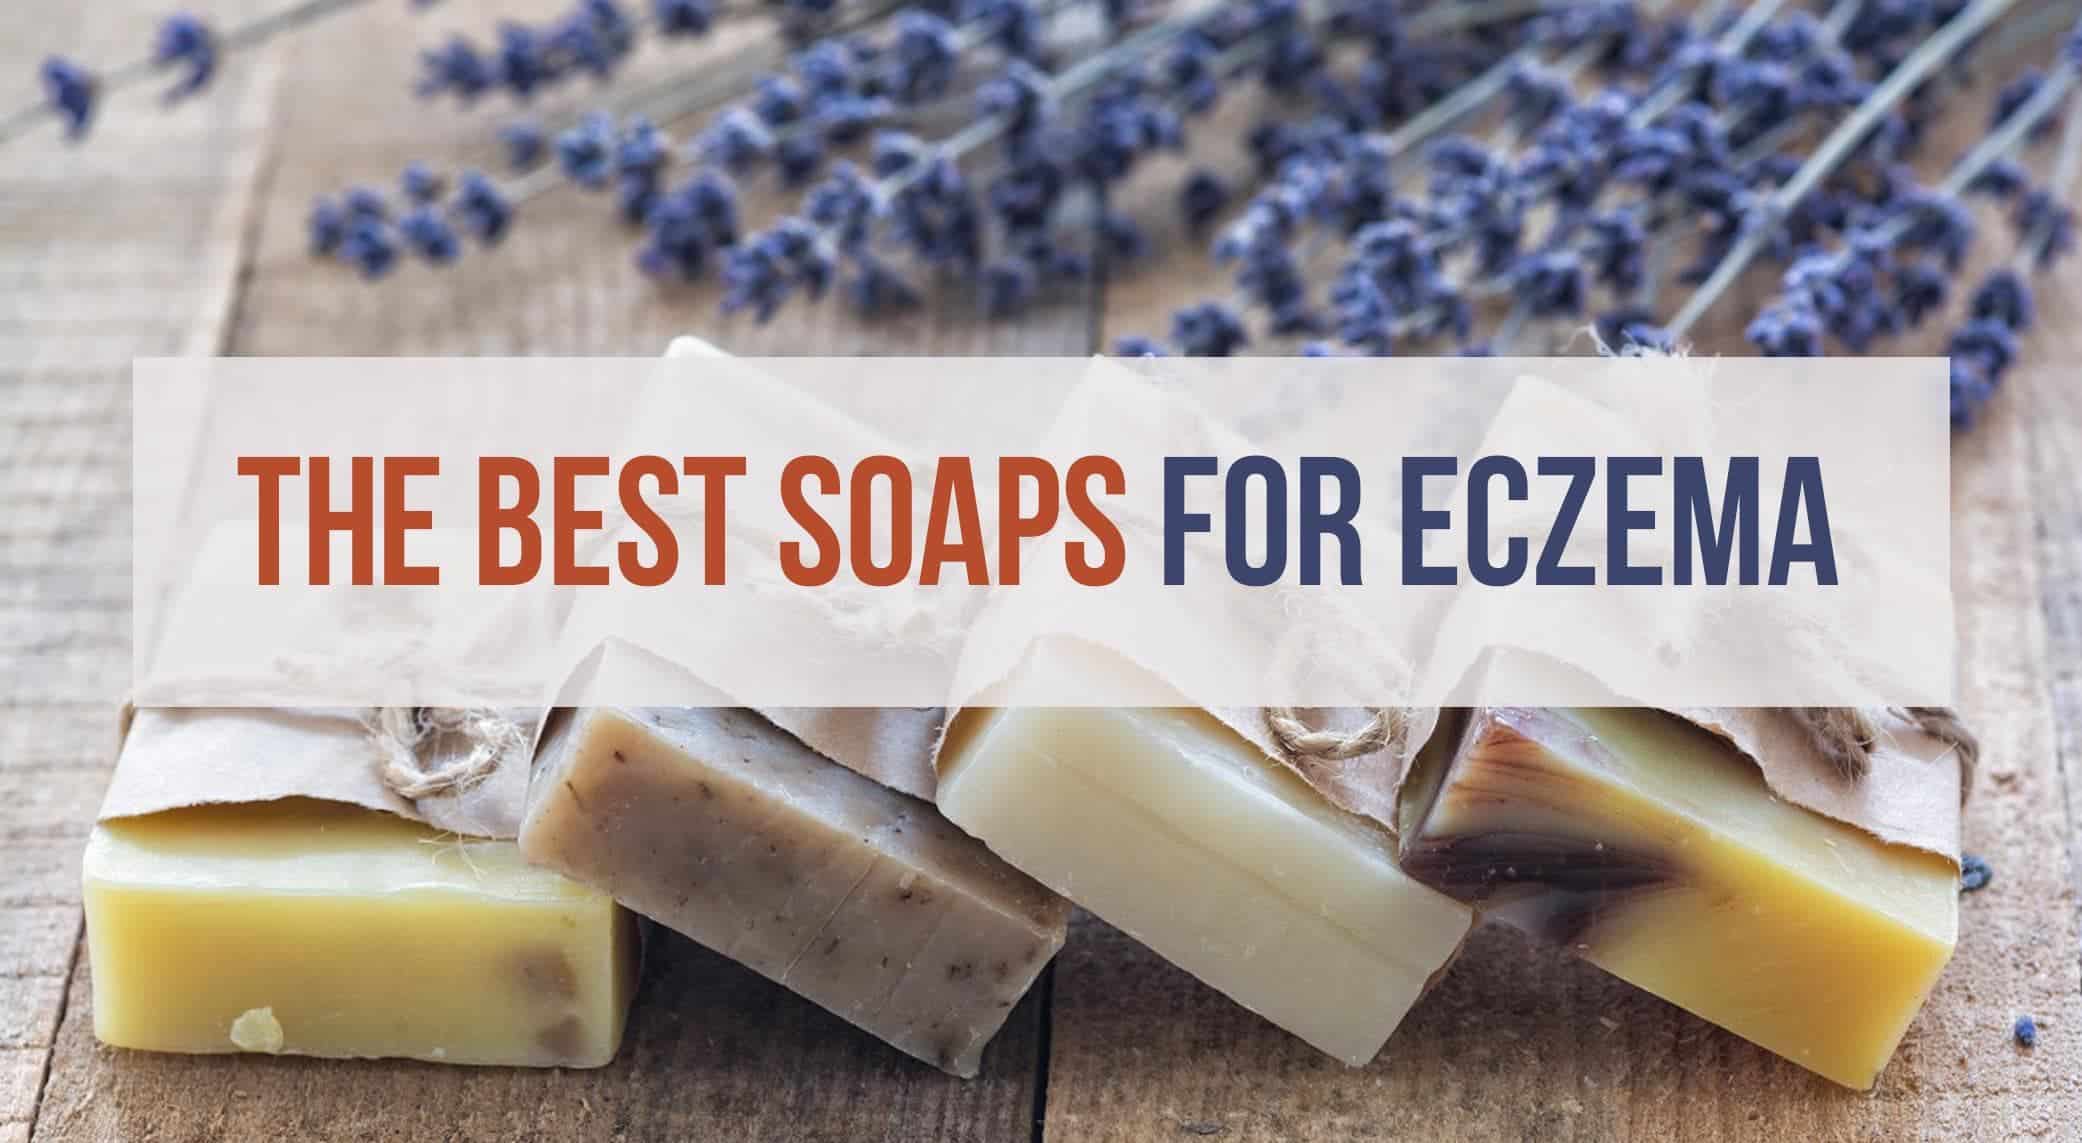 Best Soaps For Eczema  October 2020 Reviews and Top Picks